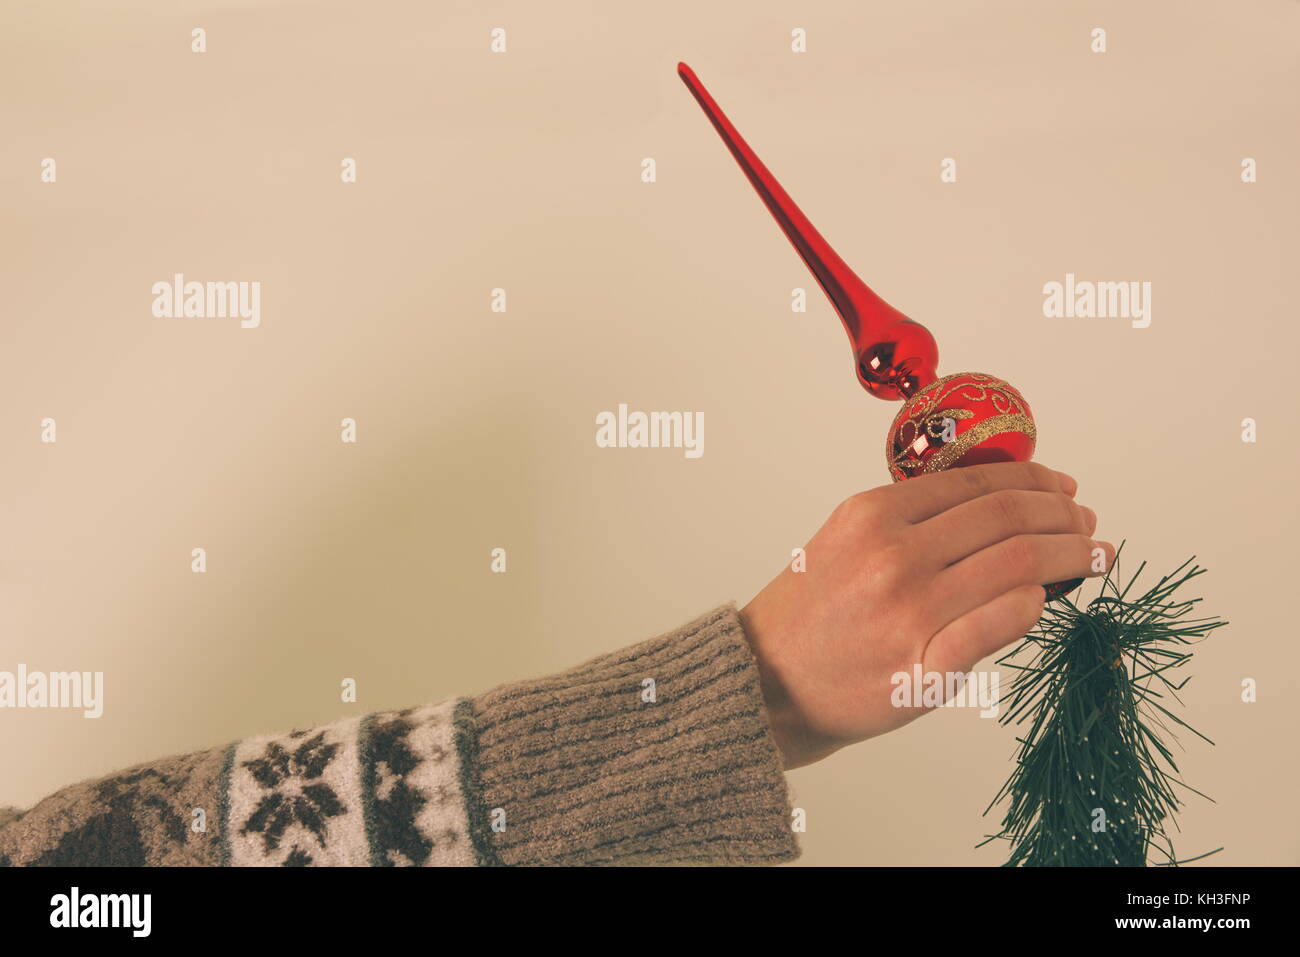 Putting Red Christmas Treetop Ornament on Top of Christmas Tree Stock Photo